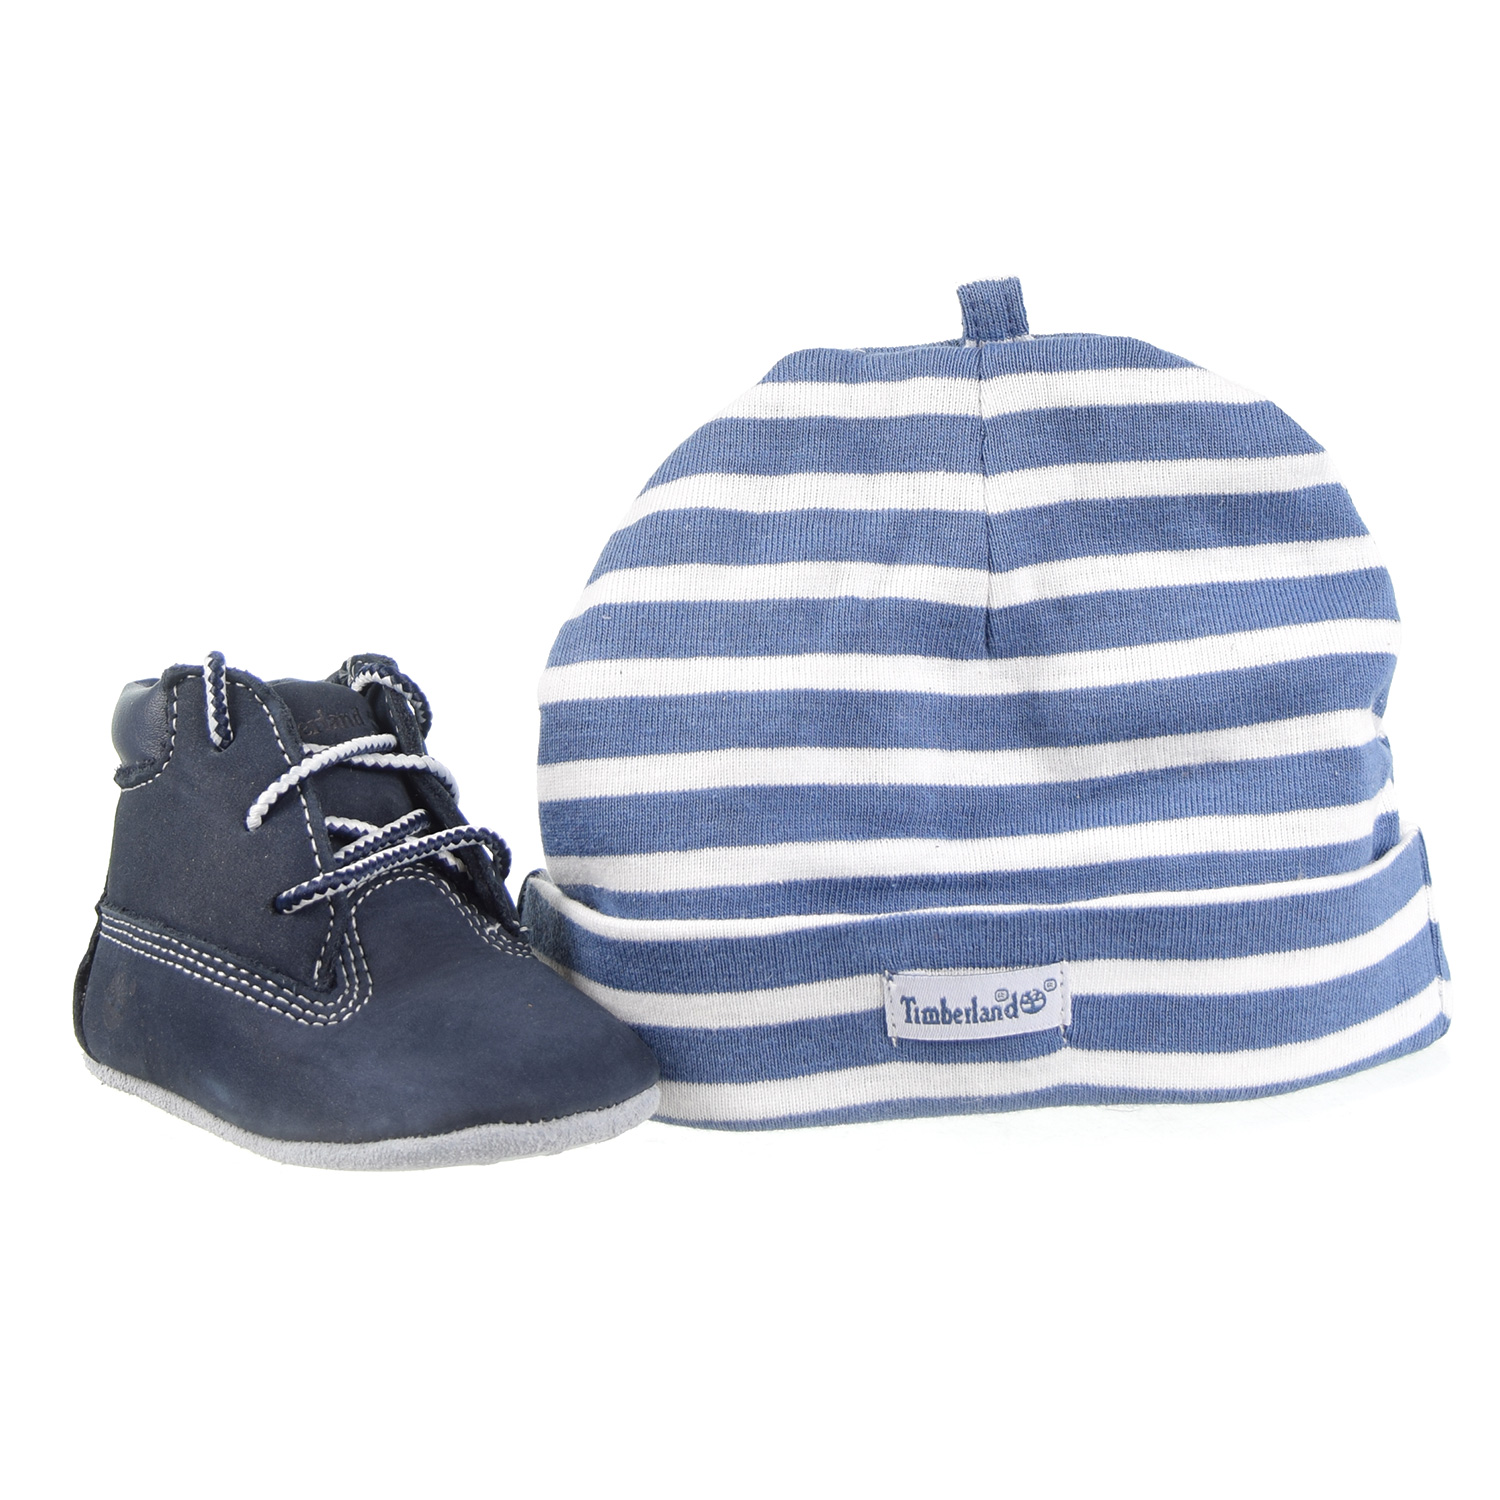 timberland booties and hat set